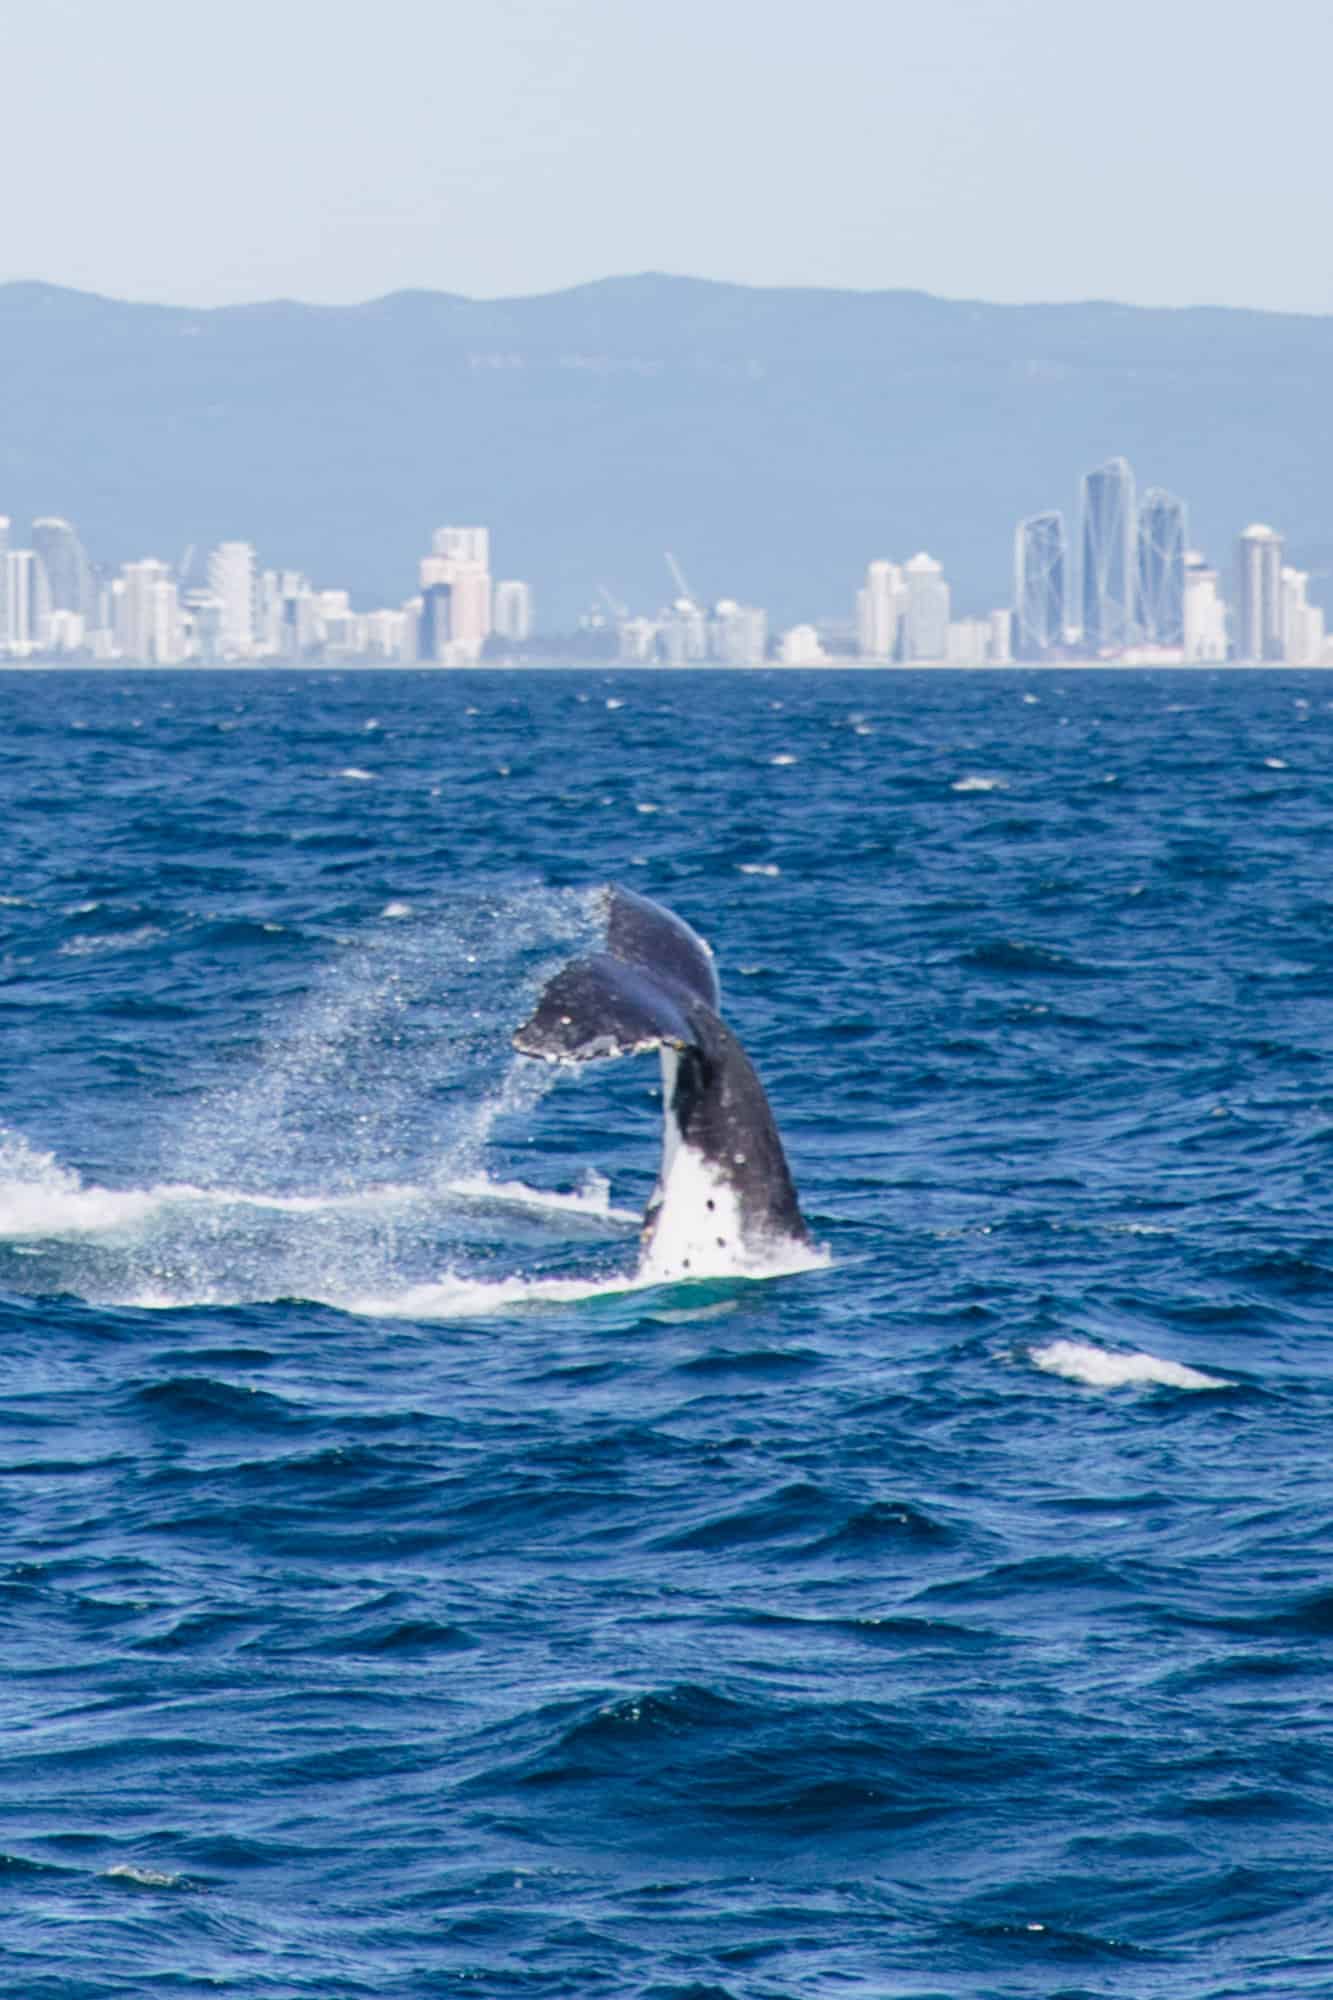 whale watching gold coast, gold coast whale watching, whale season gold coast, whale watching season gold coast, whales watching gold coast, gold coast whale watching season